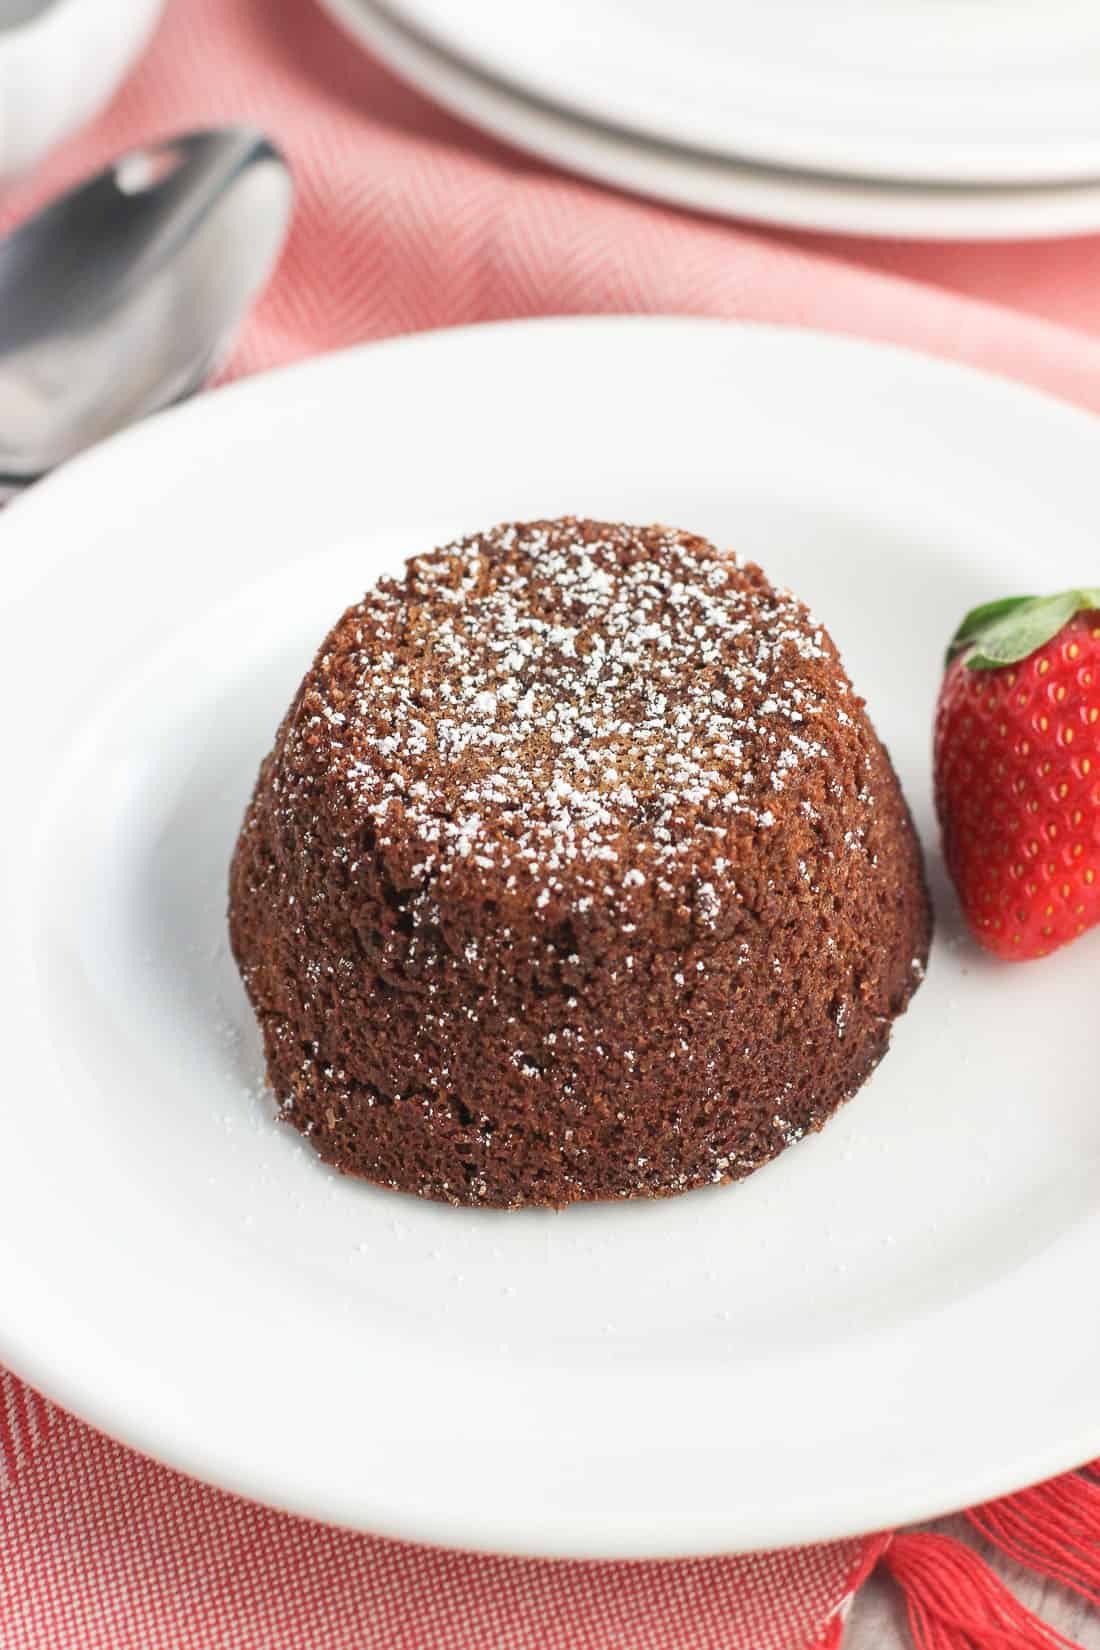 A whole lava cake inverted on a dessert plate, dusted with powdered sugar, and garnished with a fresh strawberry.